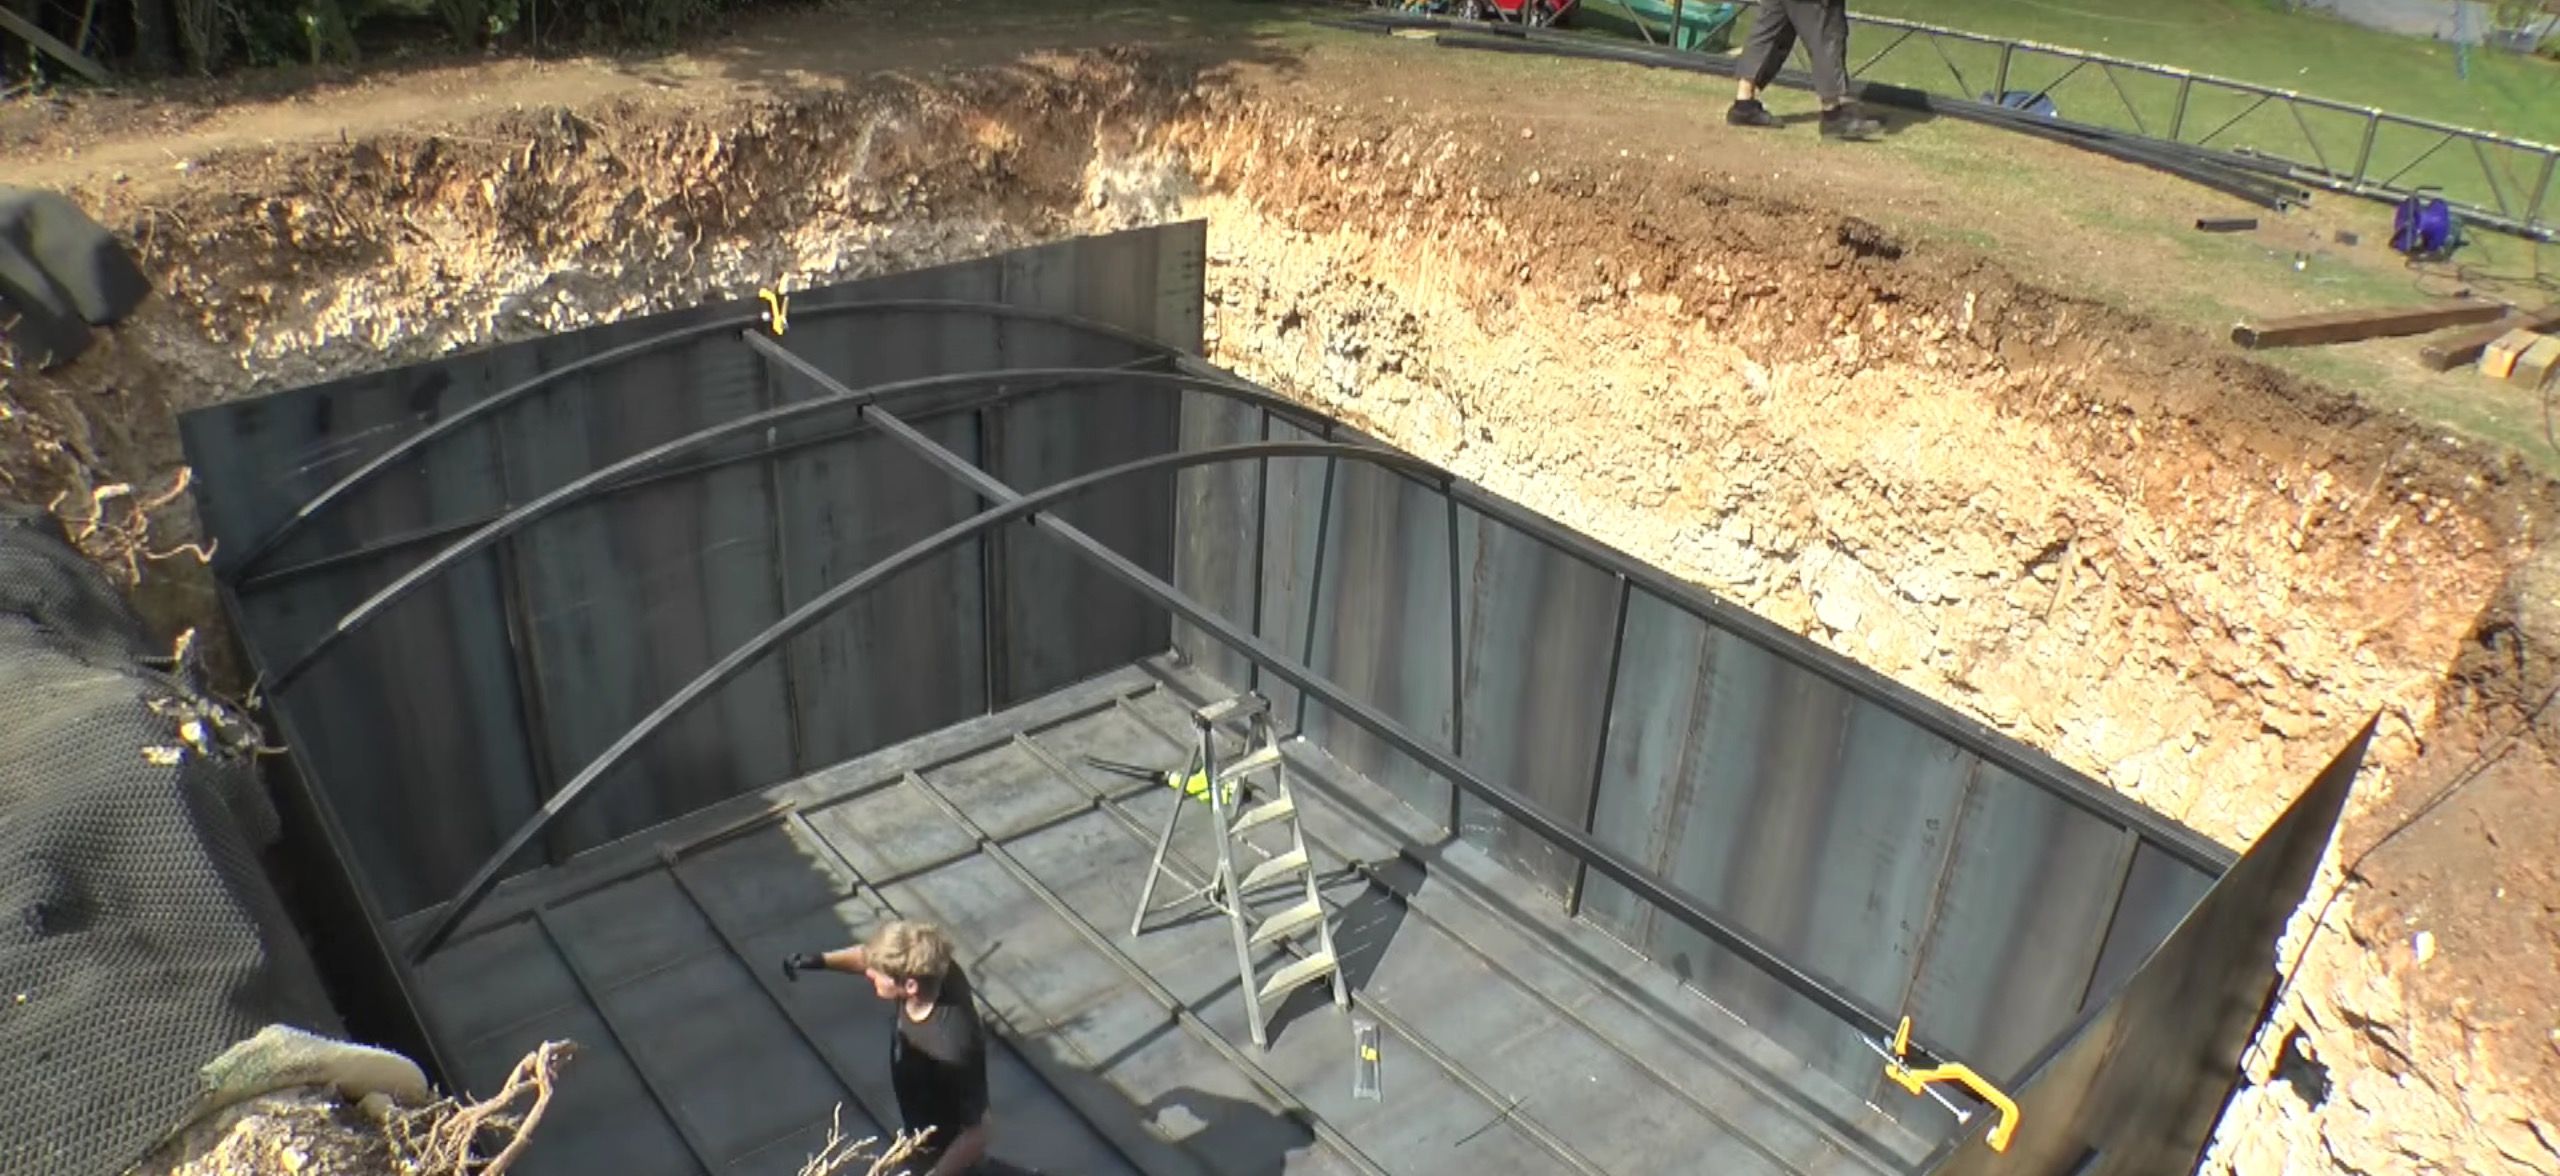 How To Build A Bunker In Your Backyard / How To Build An Underground